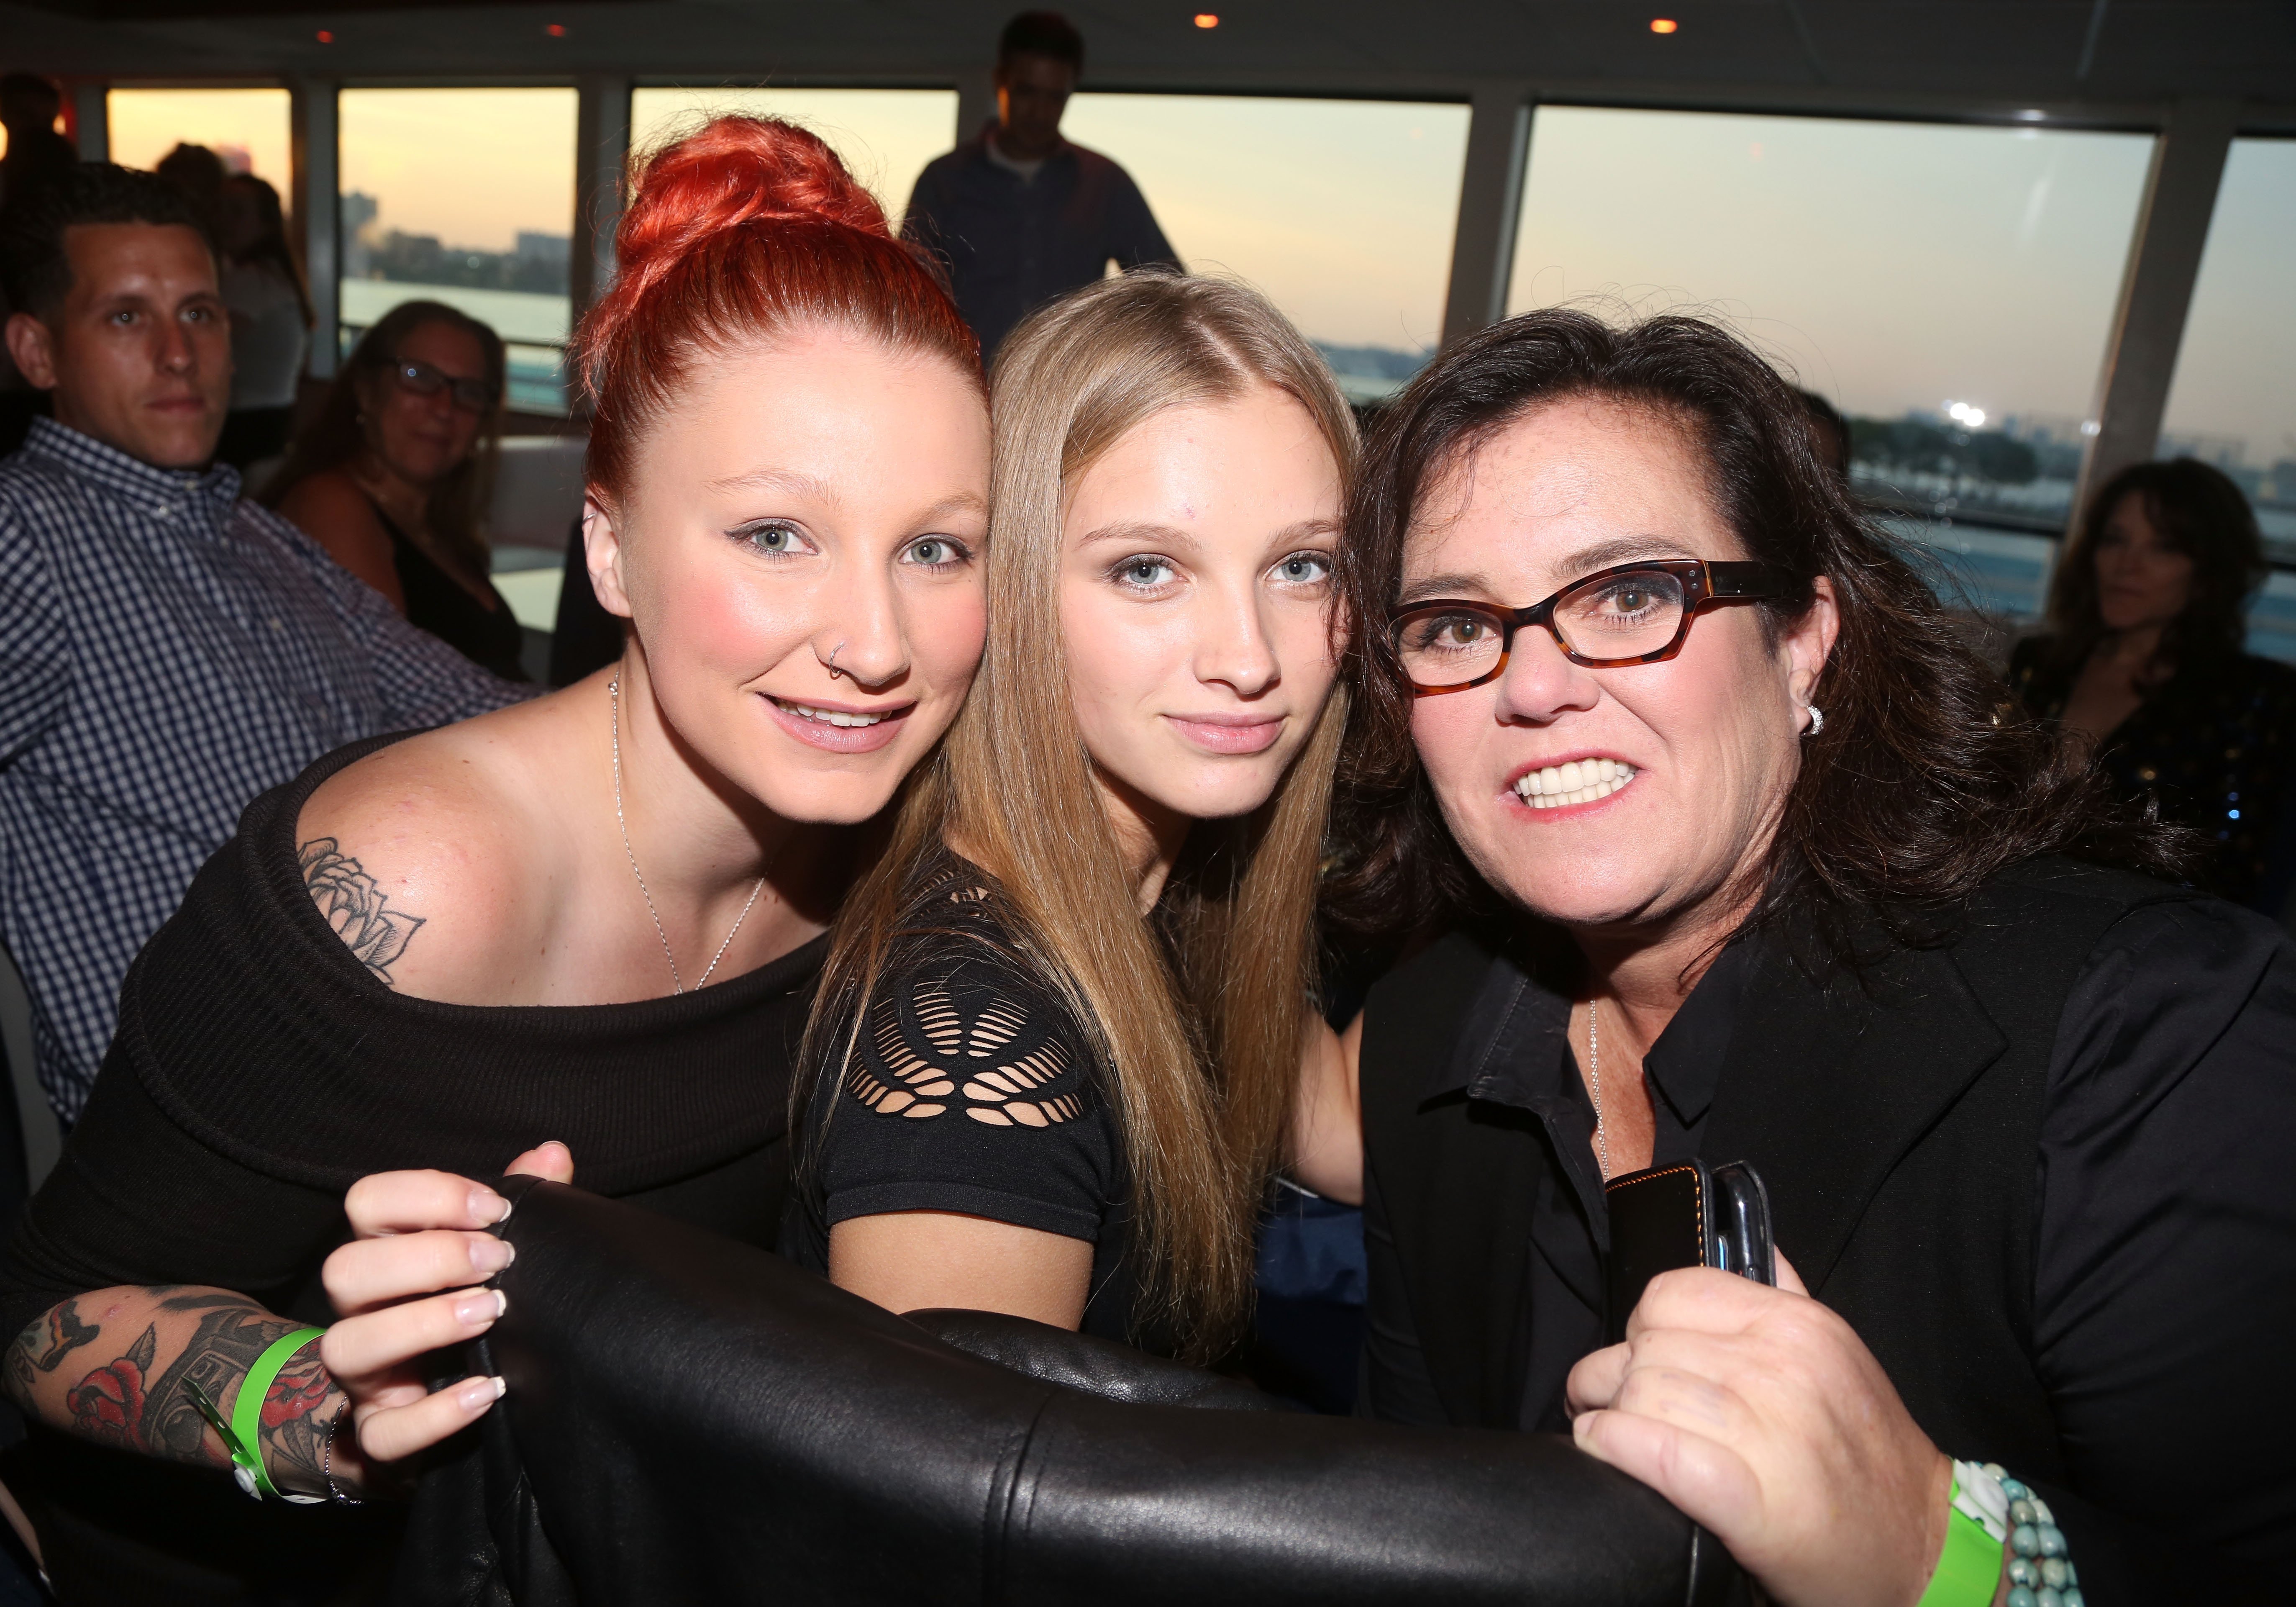 Chelsea Belle O'Donnell, Vivienne Rose O'Donnell, and Rosie O'Donnell at the "2nd Annual Fran Drescher Cancer Schmancer Sunset Cabaret Cruise" on June 20, 2016 | Source: Getty Images